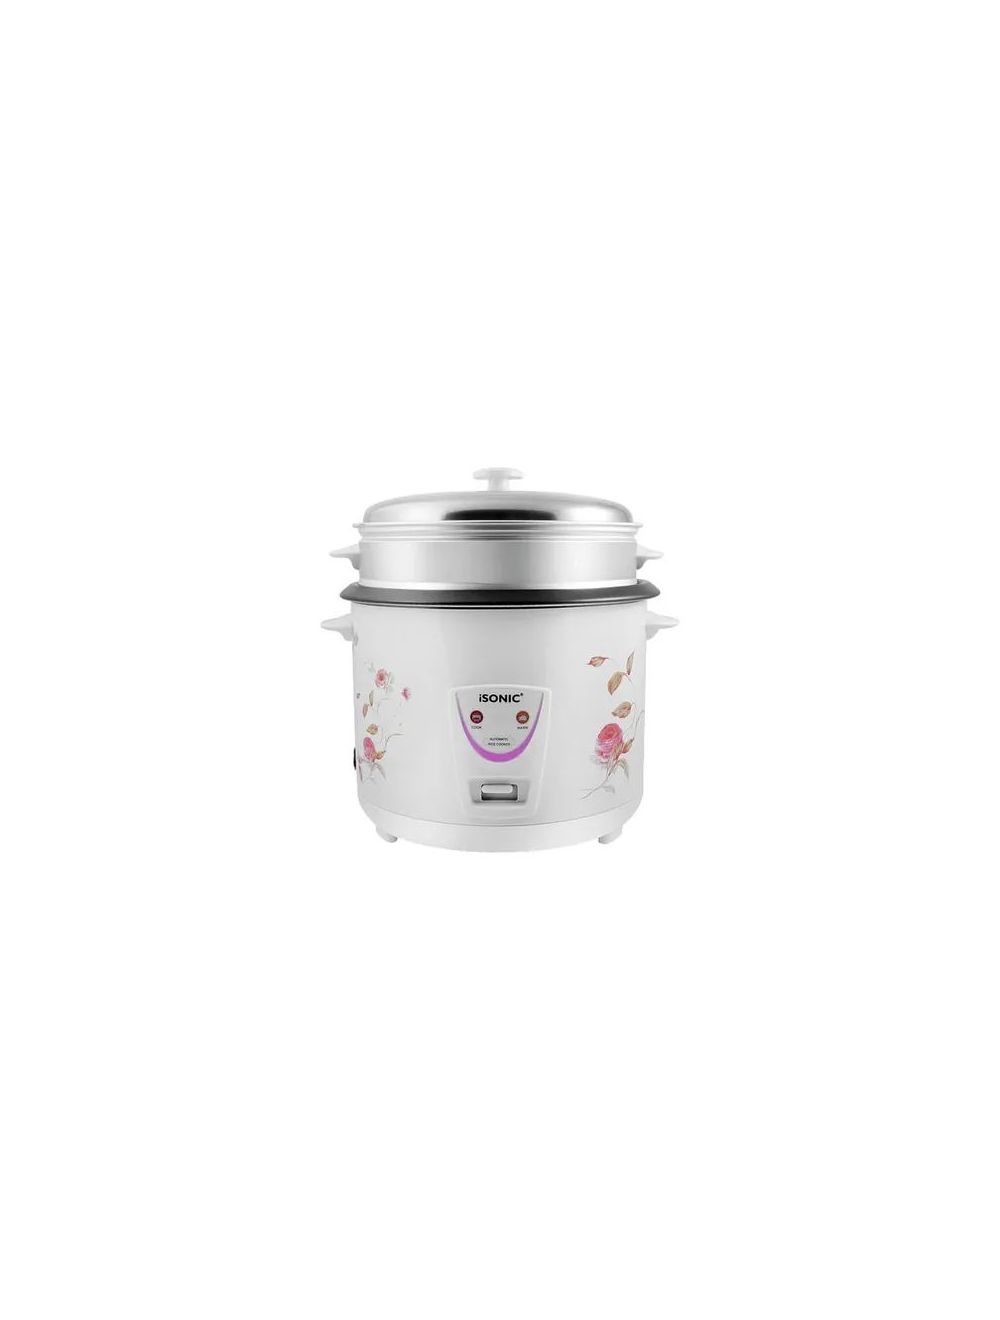 iSONIC 2.8L Rice Cooker-iRC 759